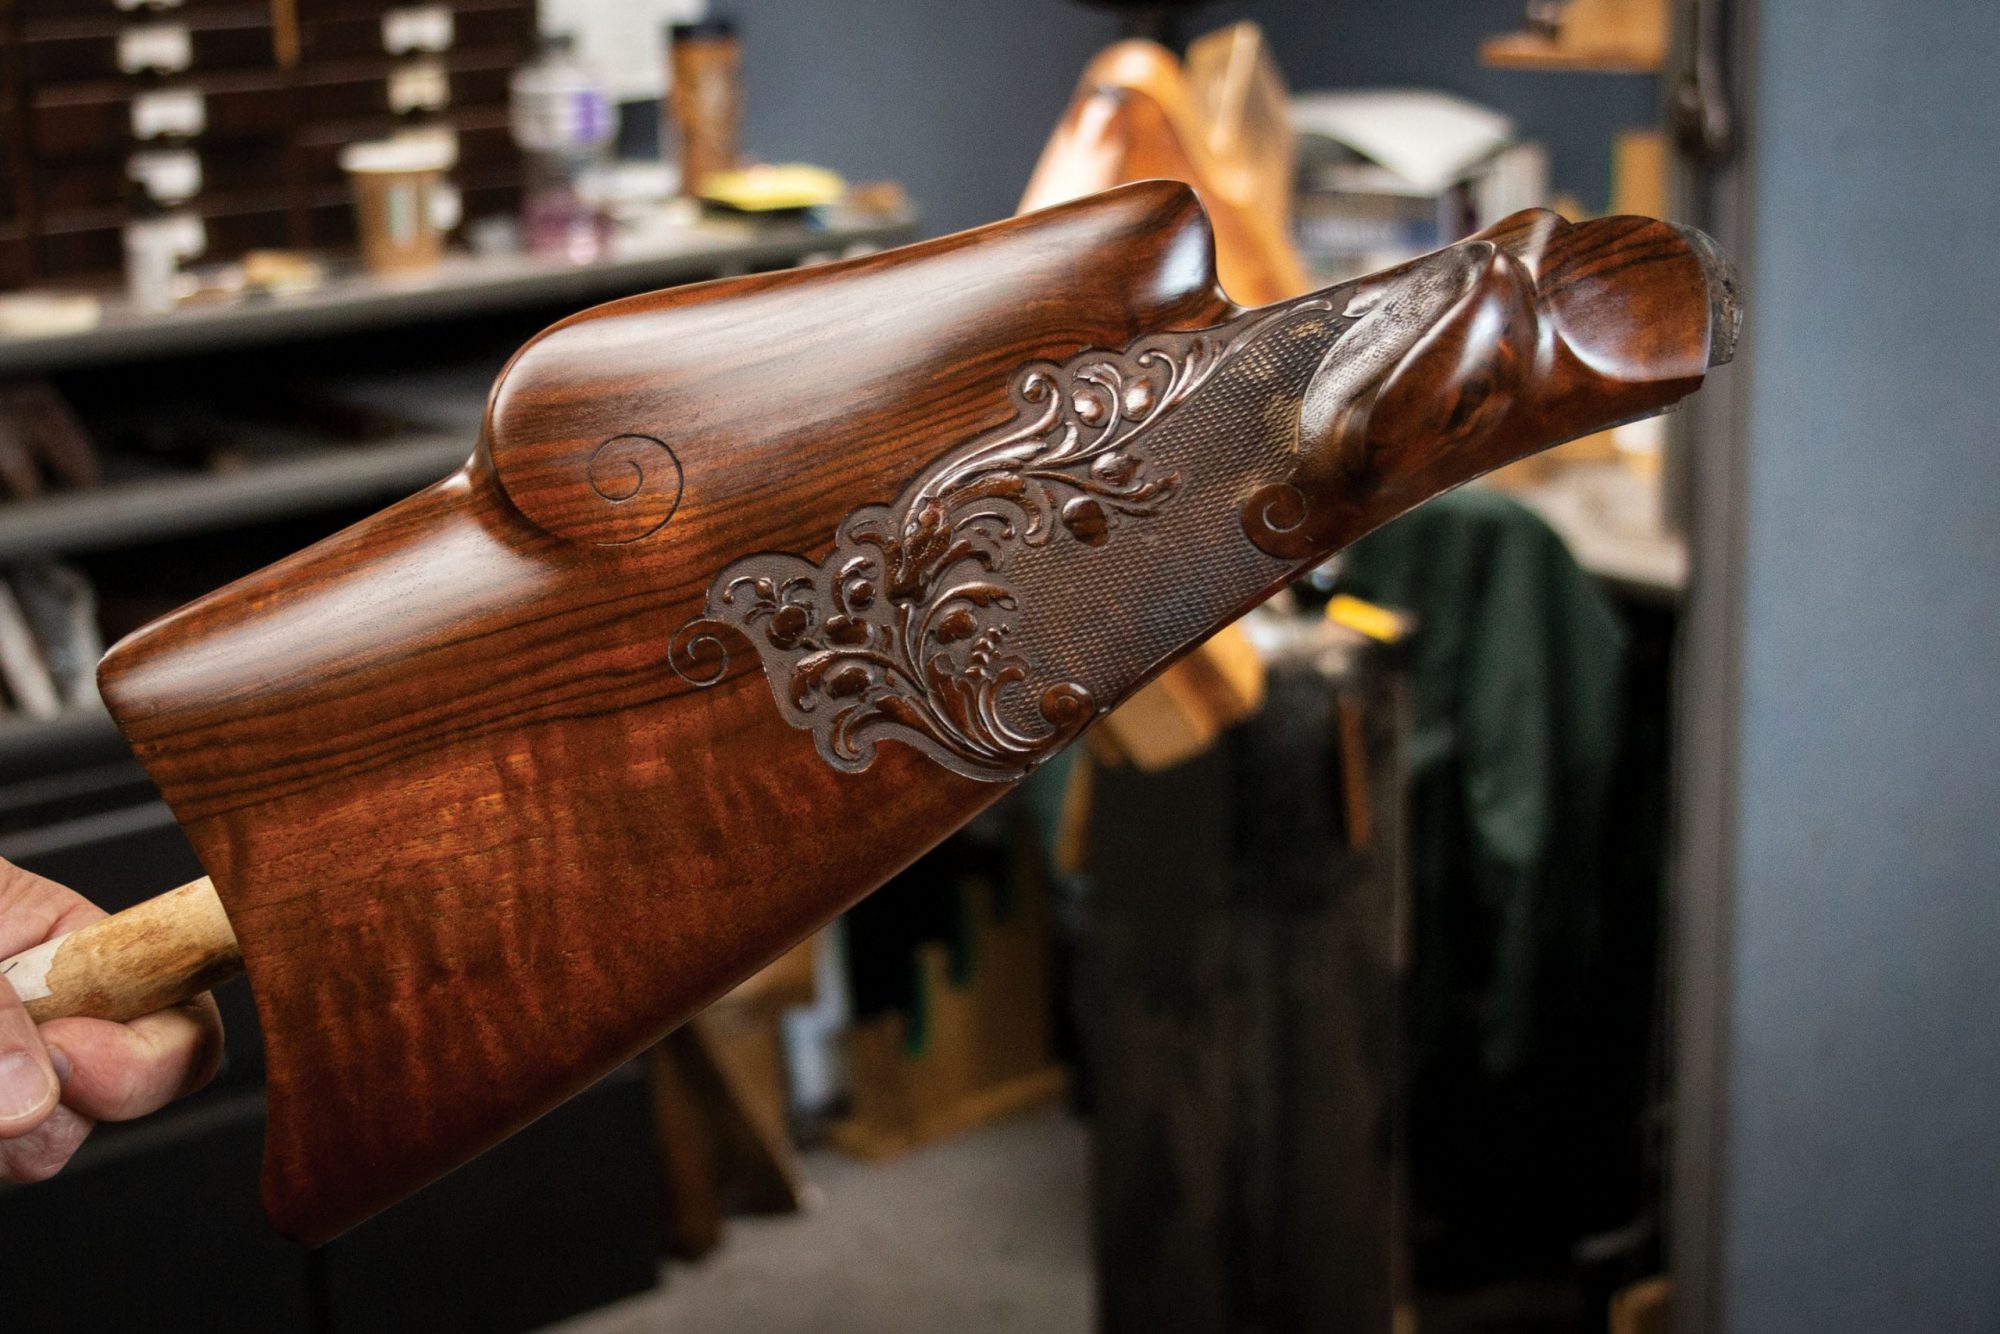 Photo of an engraved Martini style German Schuetzen rifle during restoration by Turnbull Restoration Co. of Bloomfield, NY